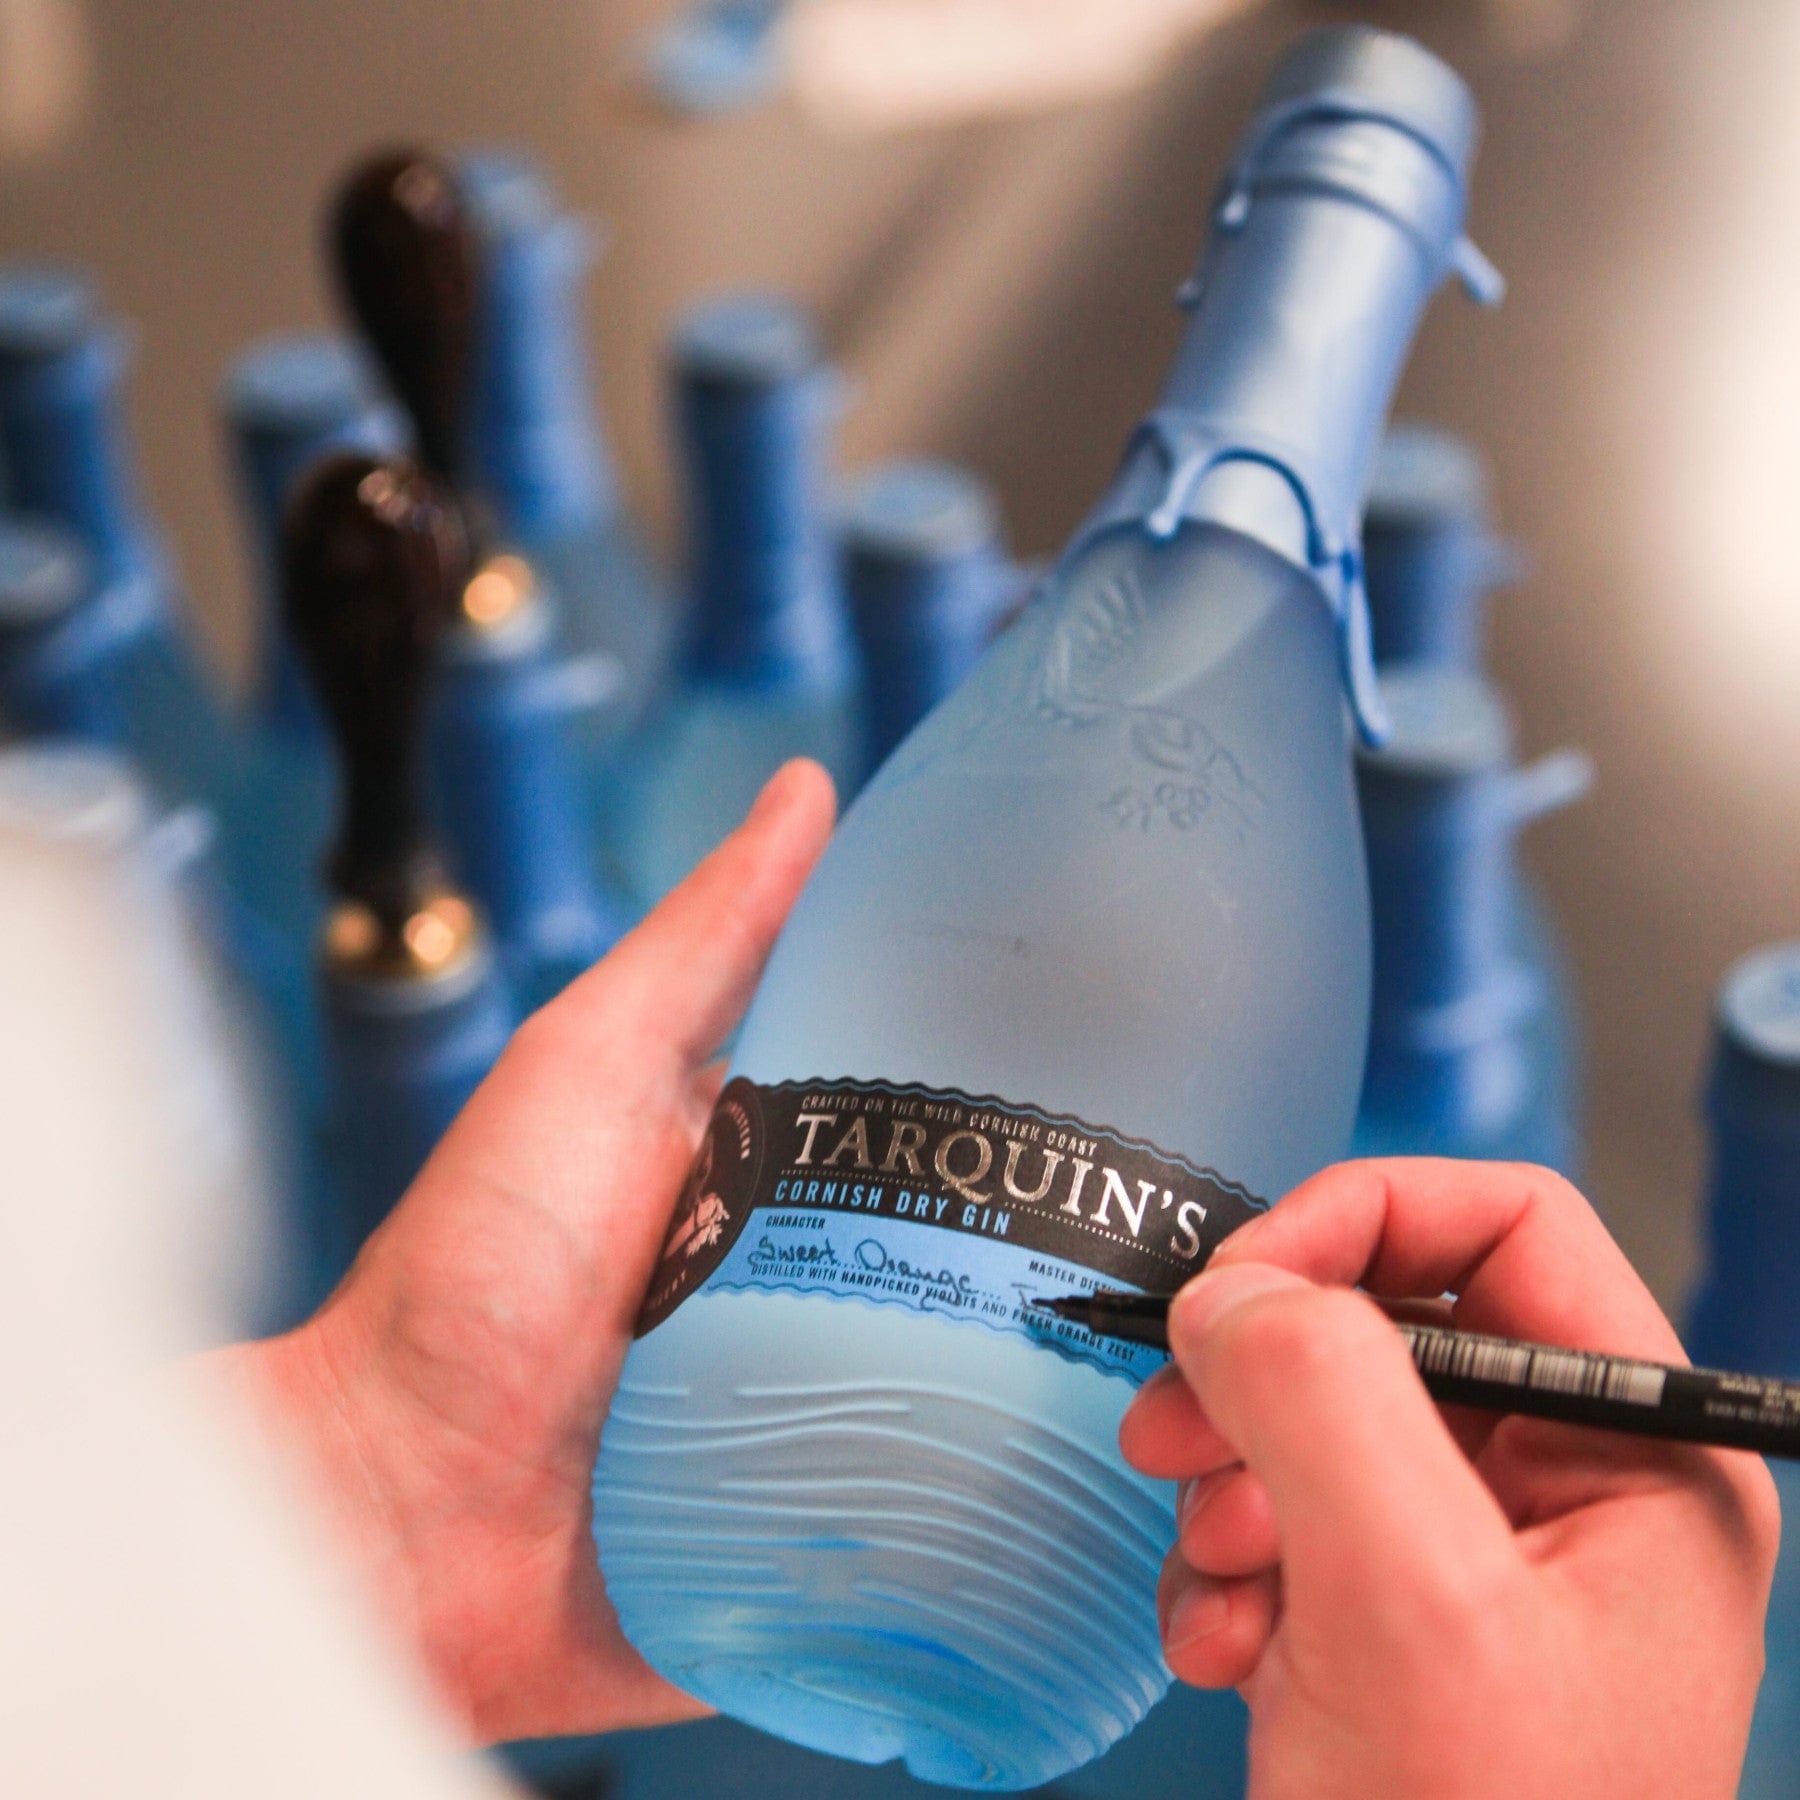 Person applying label by hand to Tarquin's Cornish Dry Gin blue bottle in a production line setting with multiple bottles in the background.